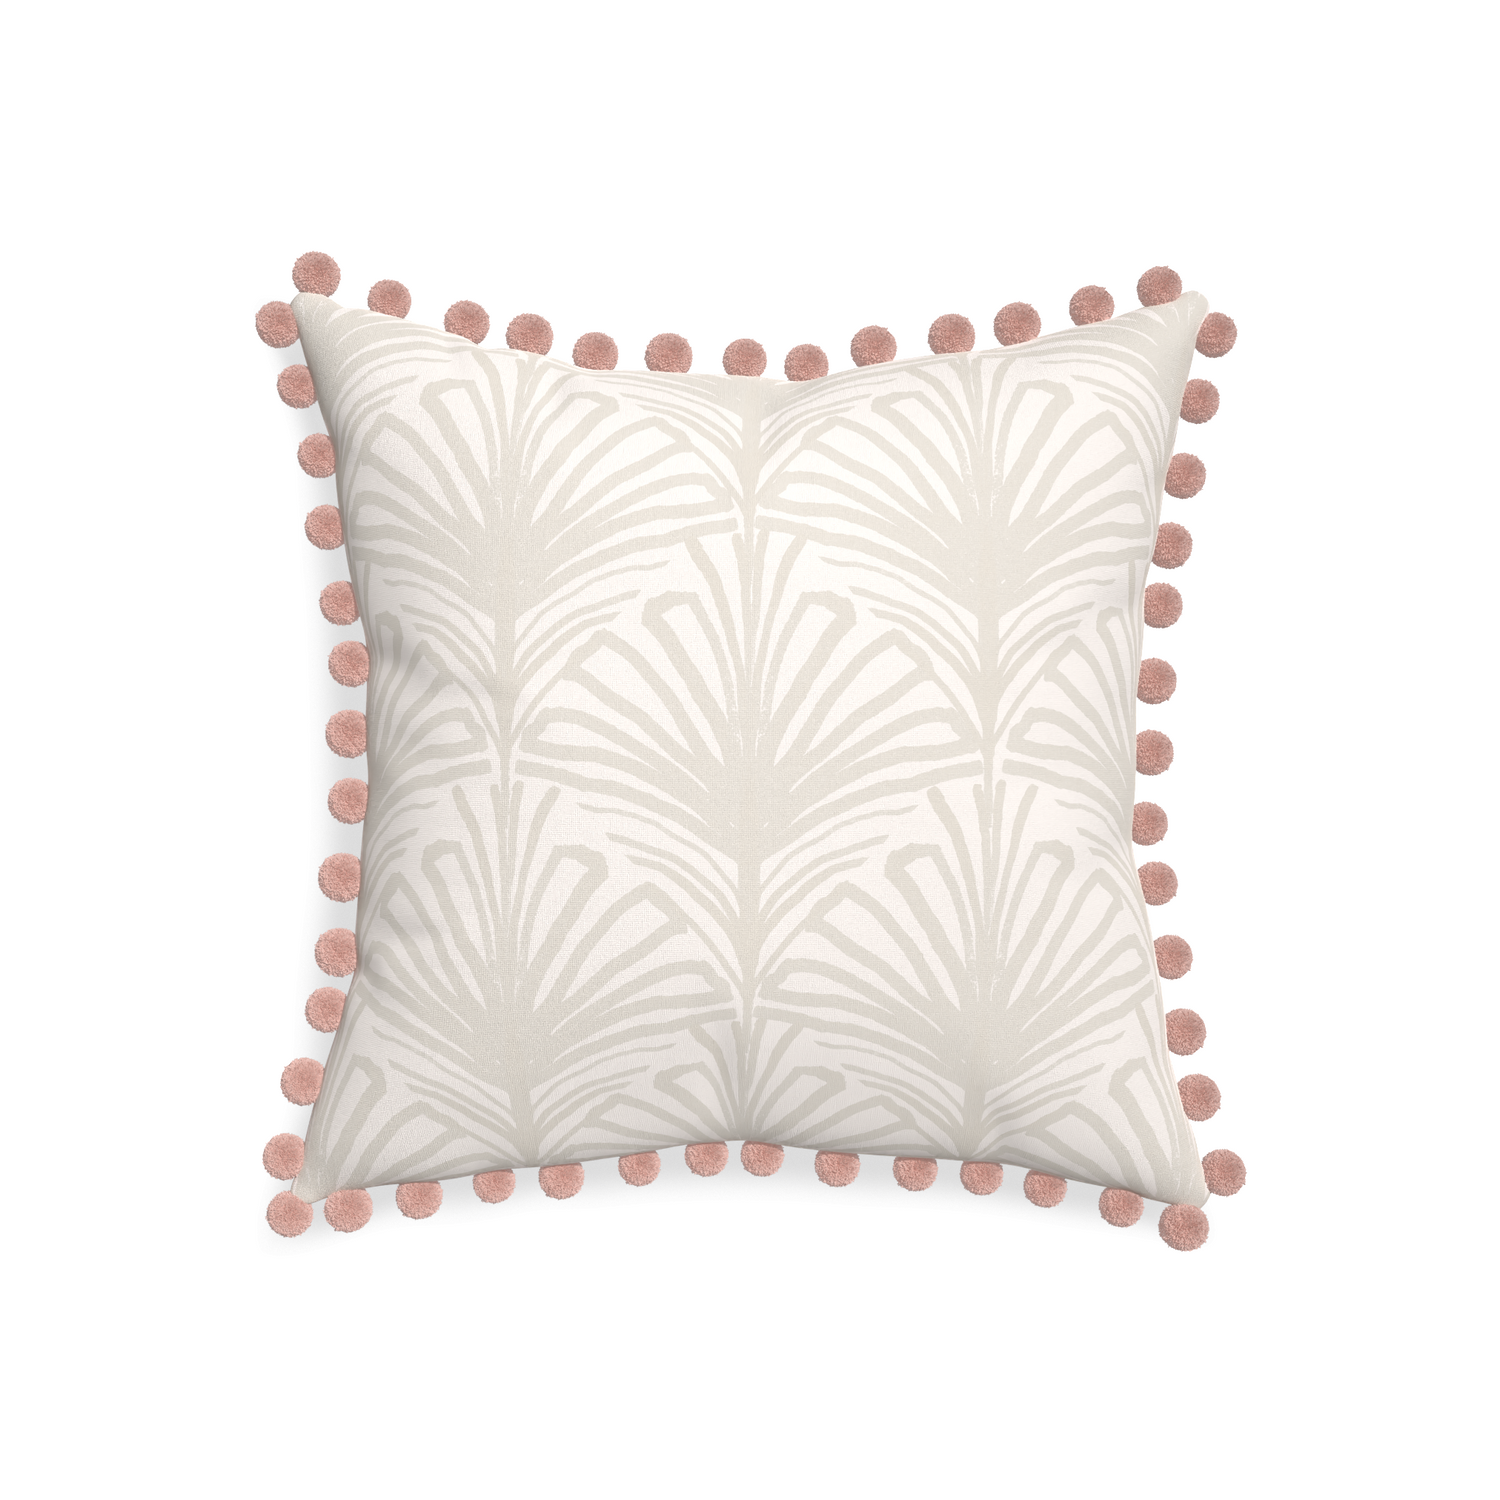 20-square suzy sand custom beige palmpillow with rose pom pom on white background